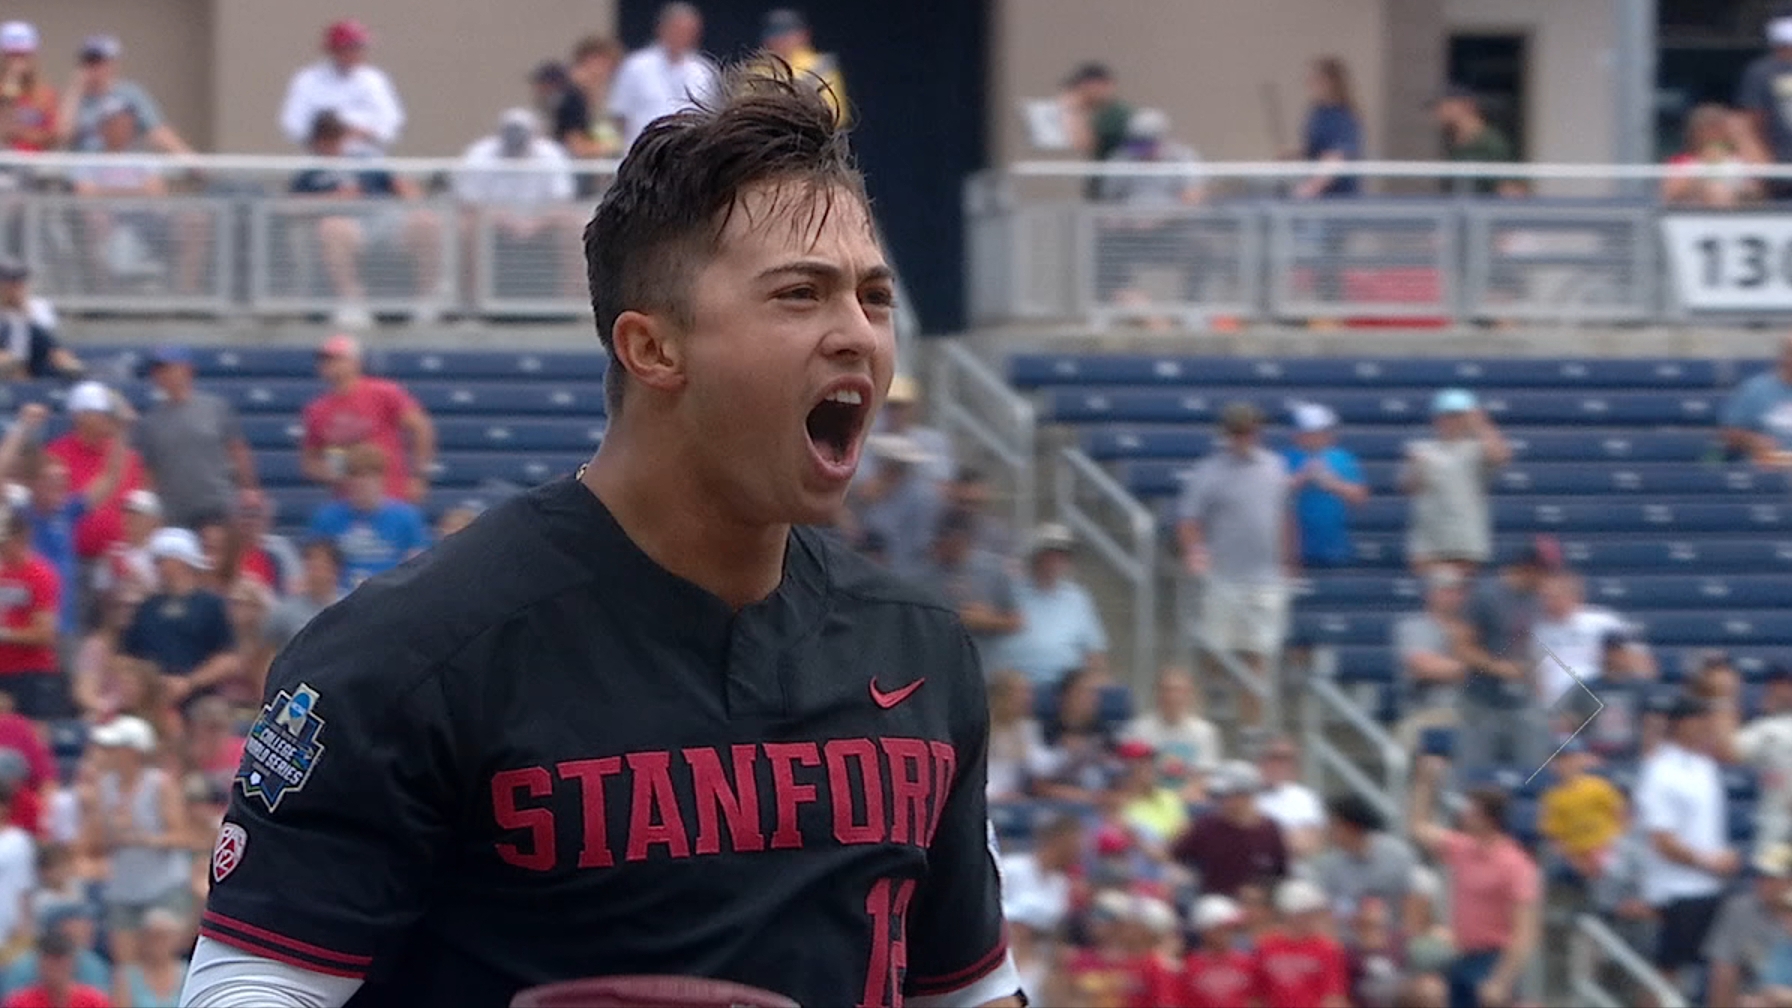 Tommy Troy smashes homer to pad Stanford's lead